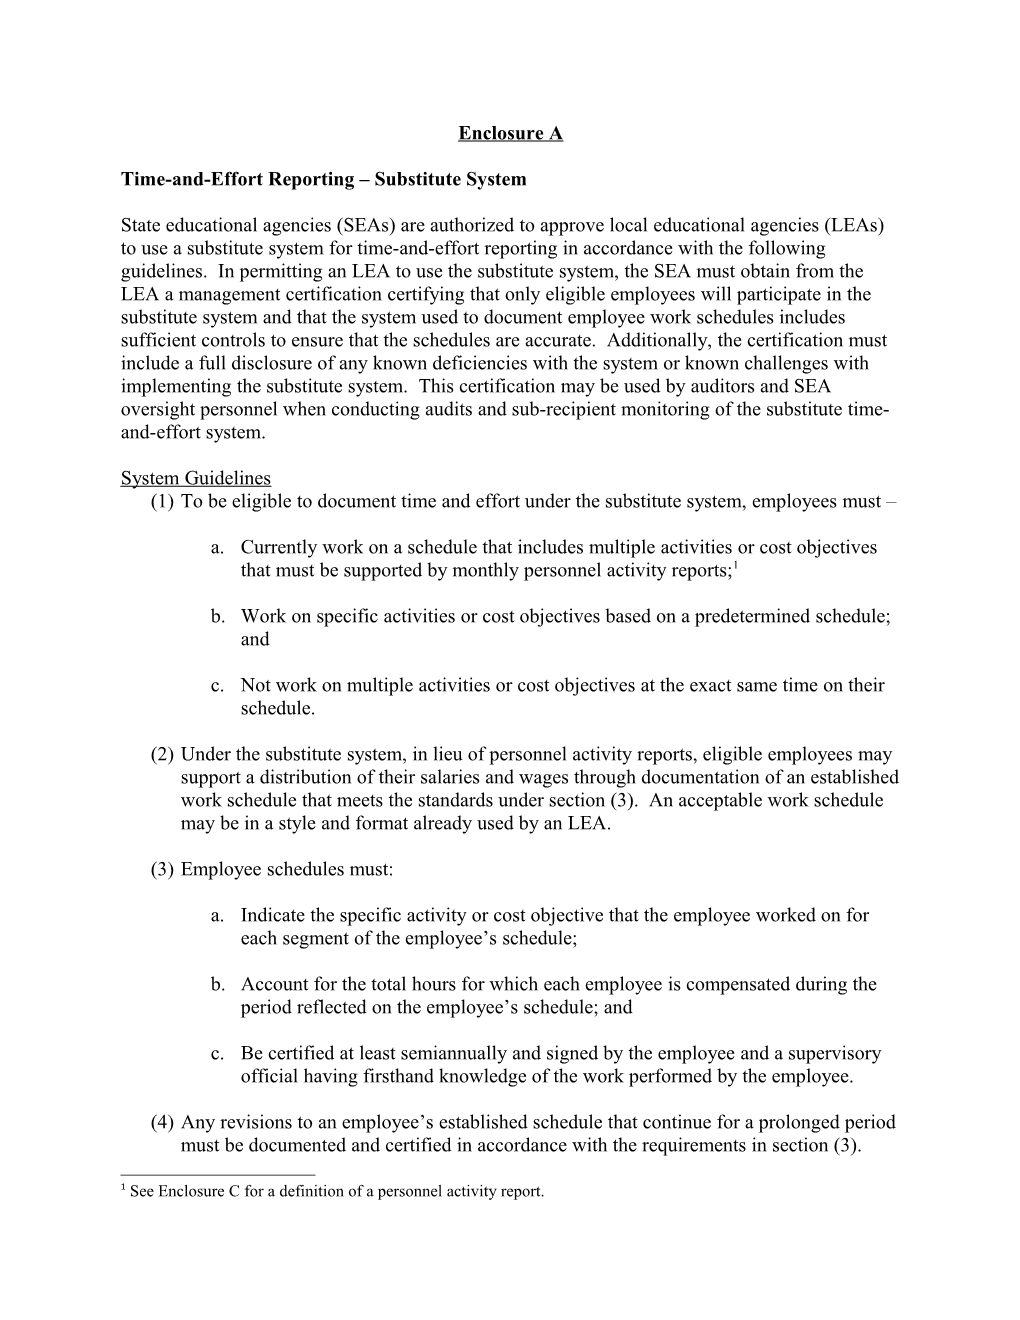 Enclosure A: Letter to Chief State School Officers on Granting Administrative Flexibility